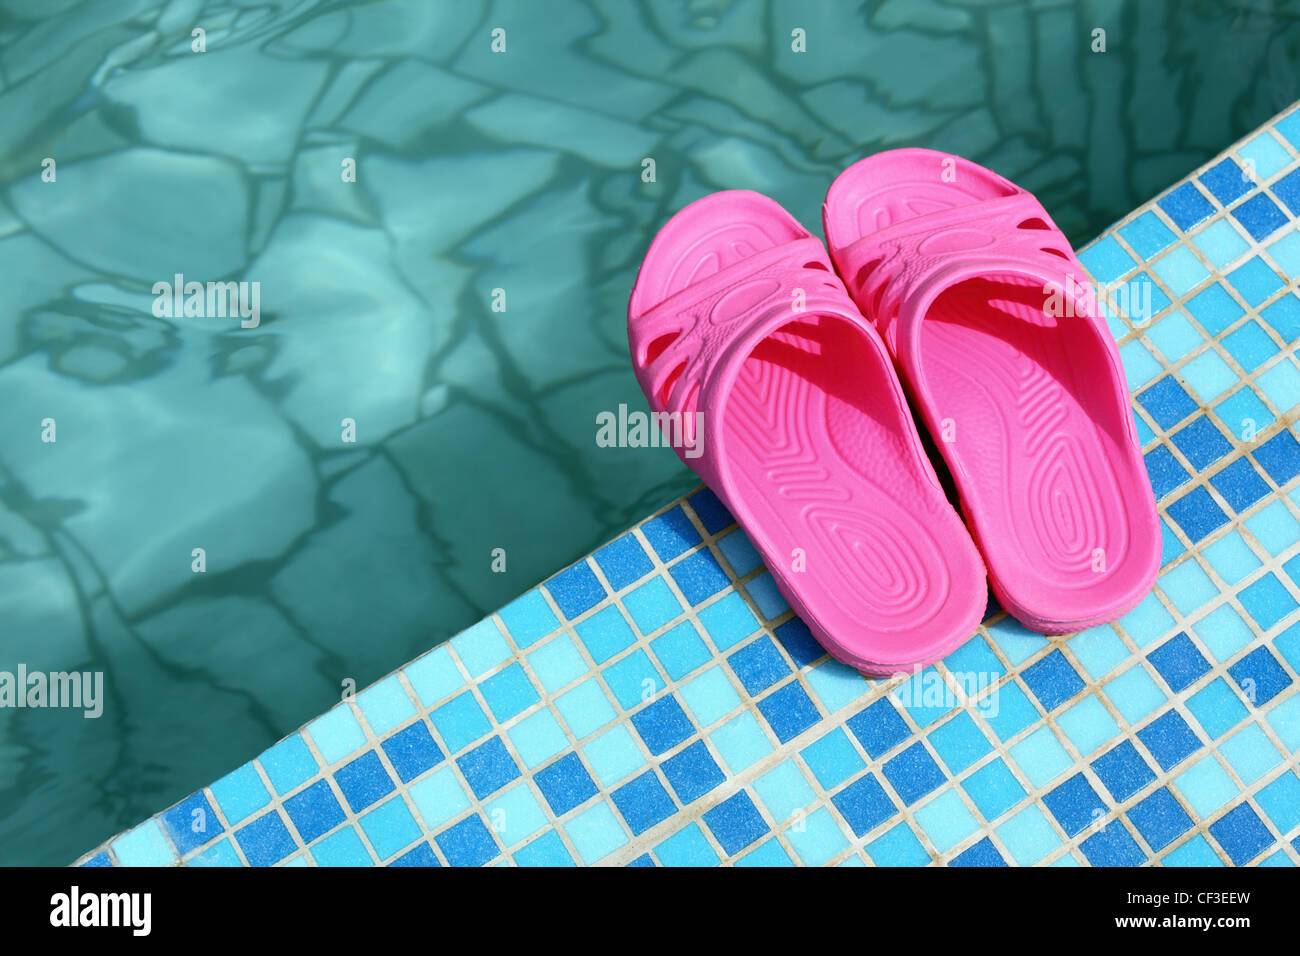 Beach slippers on pool side Stock Photo